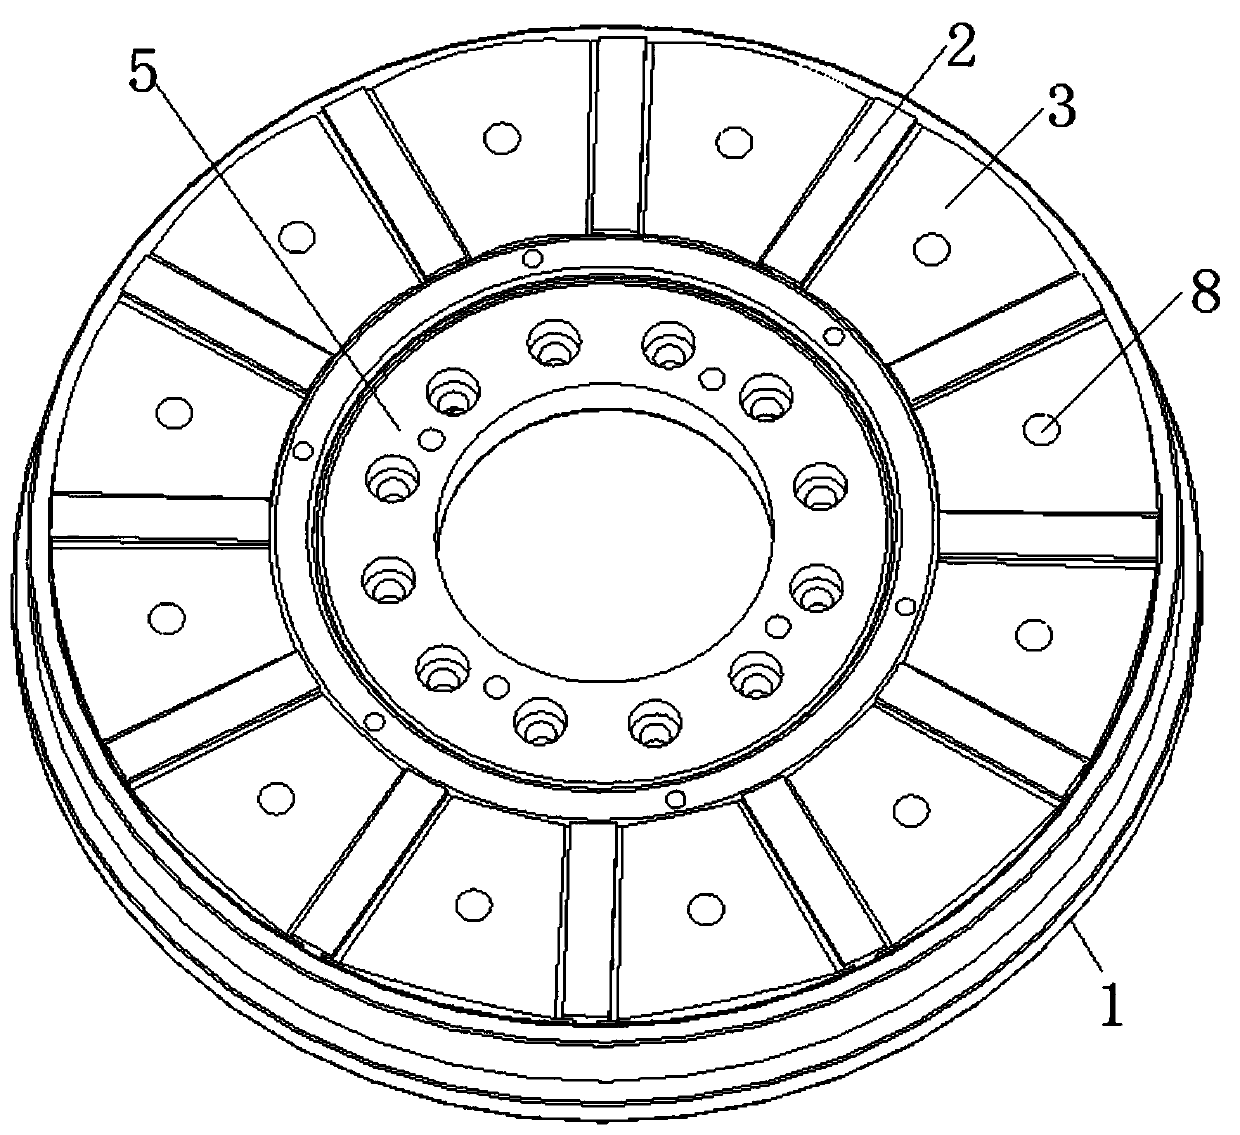 Disc type motor rotor with pole shoe composite magnetic pole structure